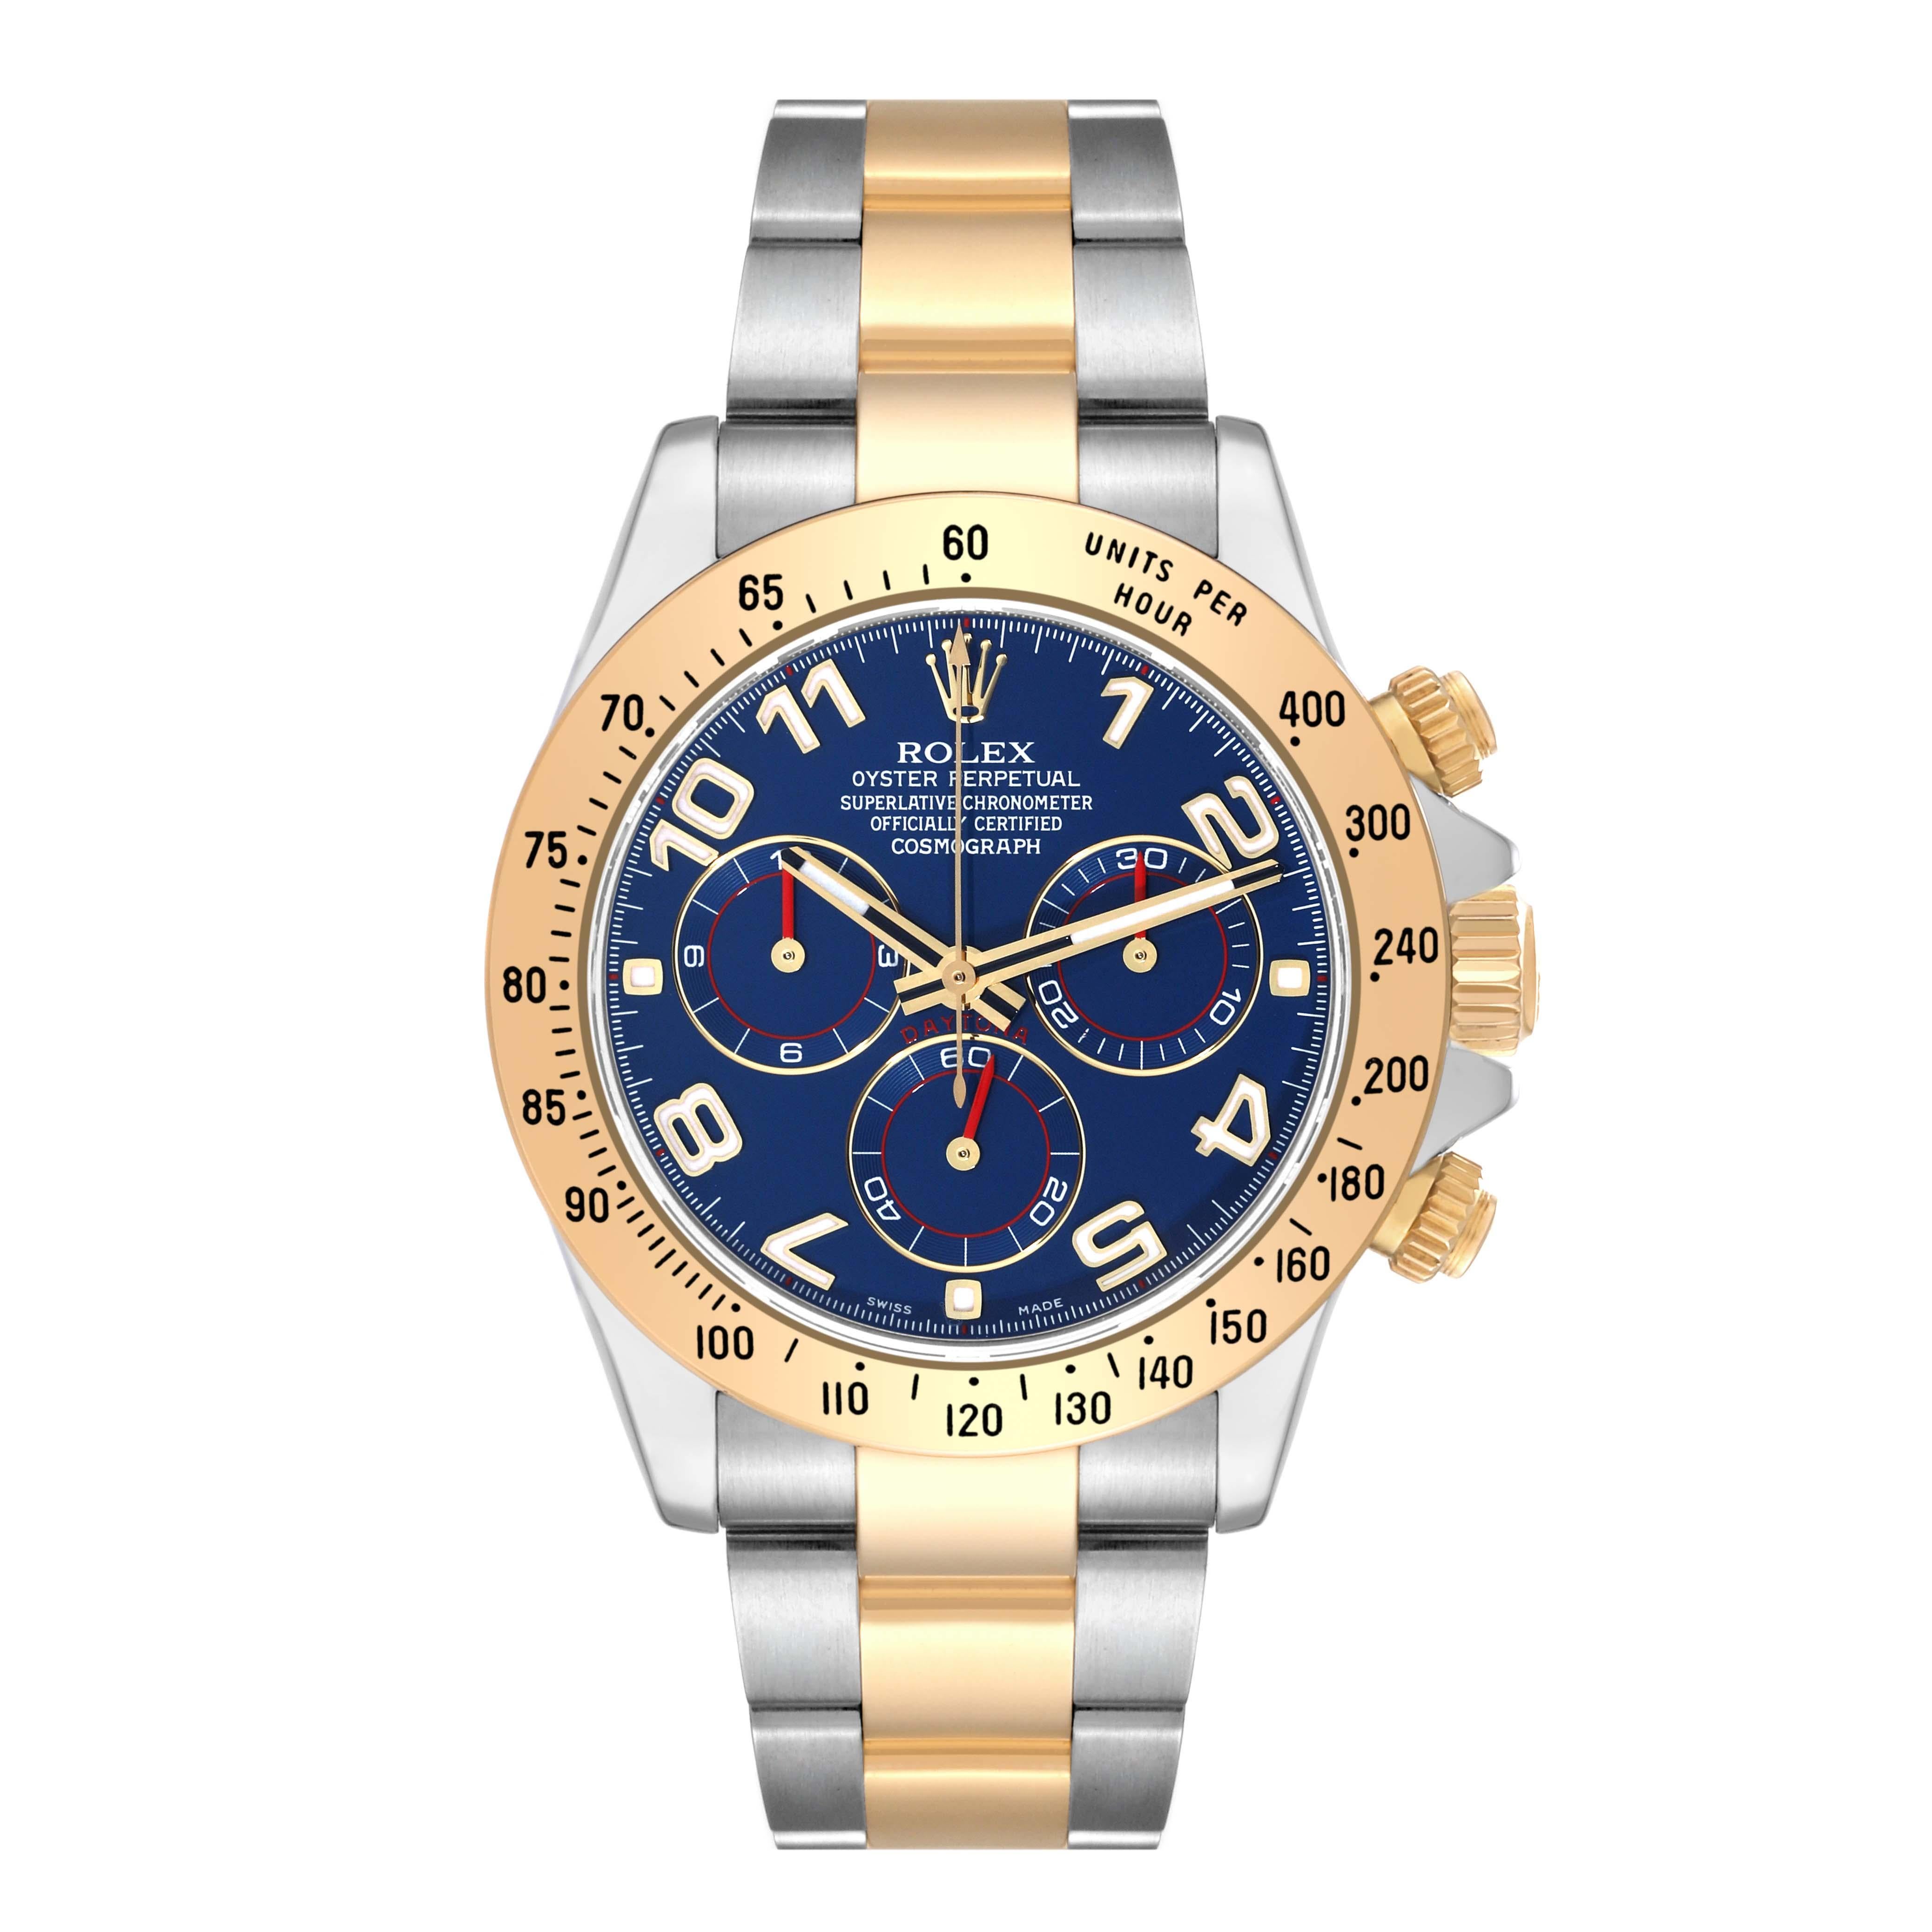 Rolex Daytona Steel Yellow Gold Blue Racing Dial Mens Watch 116523. Officially certified chronometer self-winding movement. Rhodium-plated, oeil-de-perdrix decoration, straight line lever escapement, monometallic balance adjusted to 5 positions,